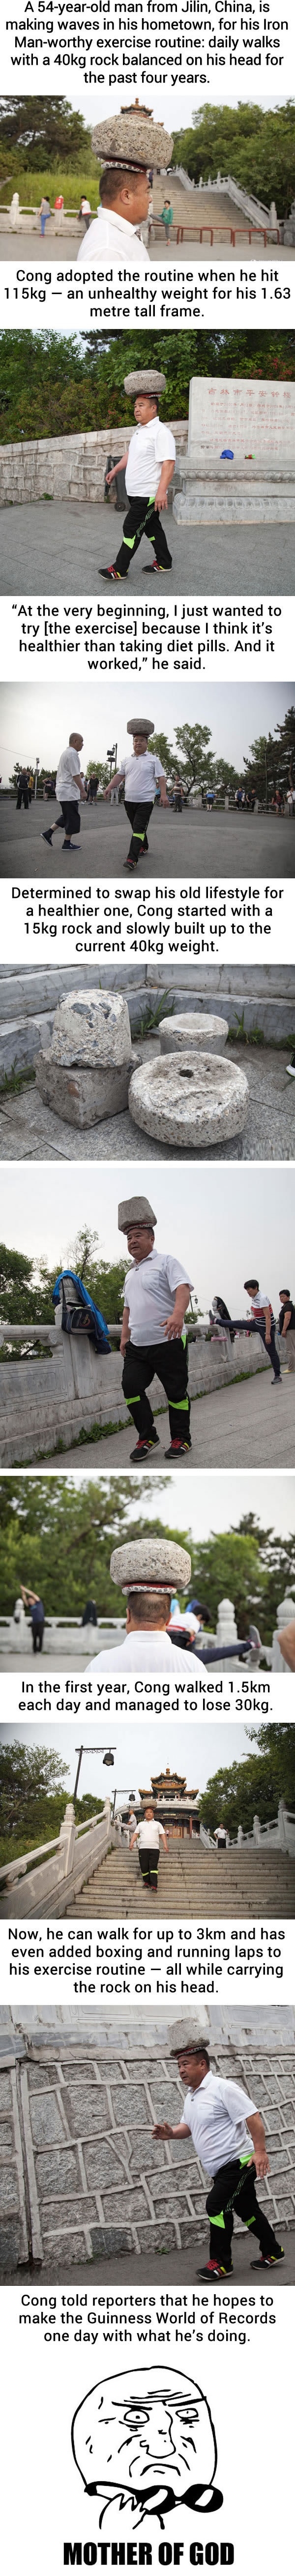 Chinese man has been walking with a 40kg rock on his head